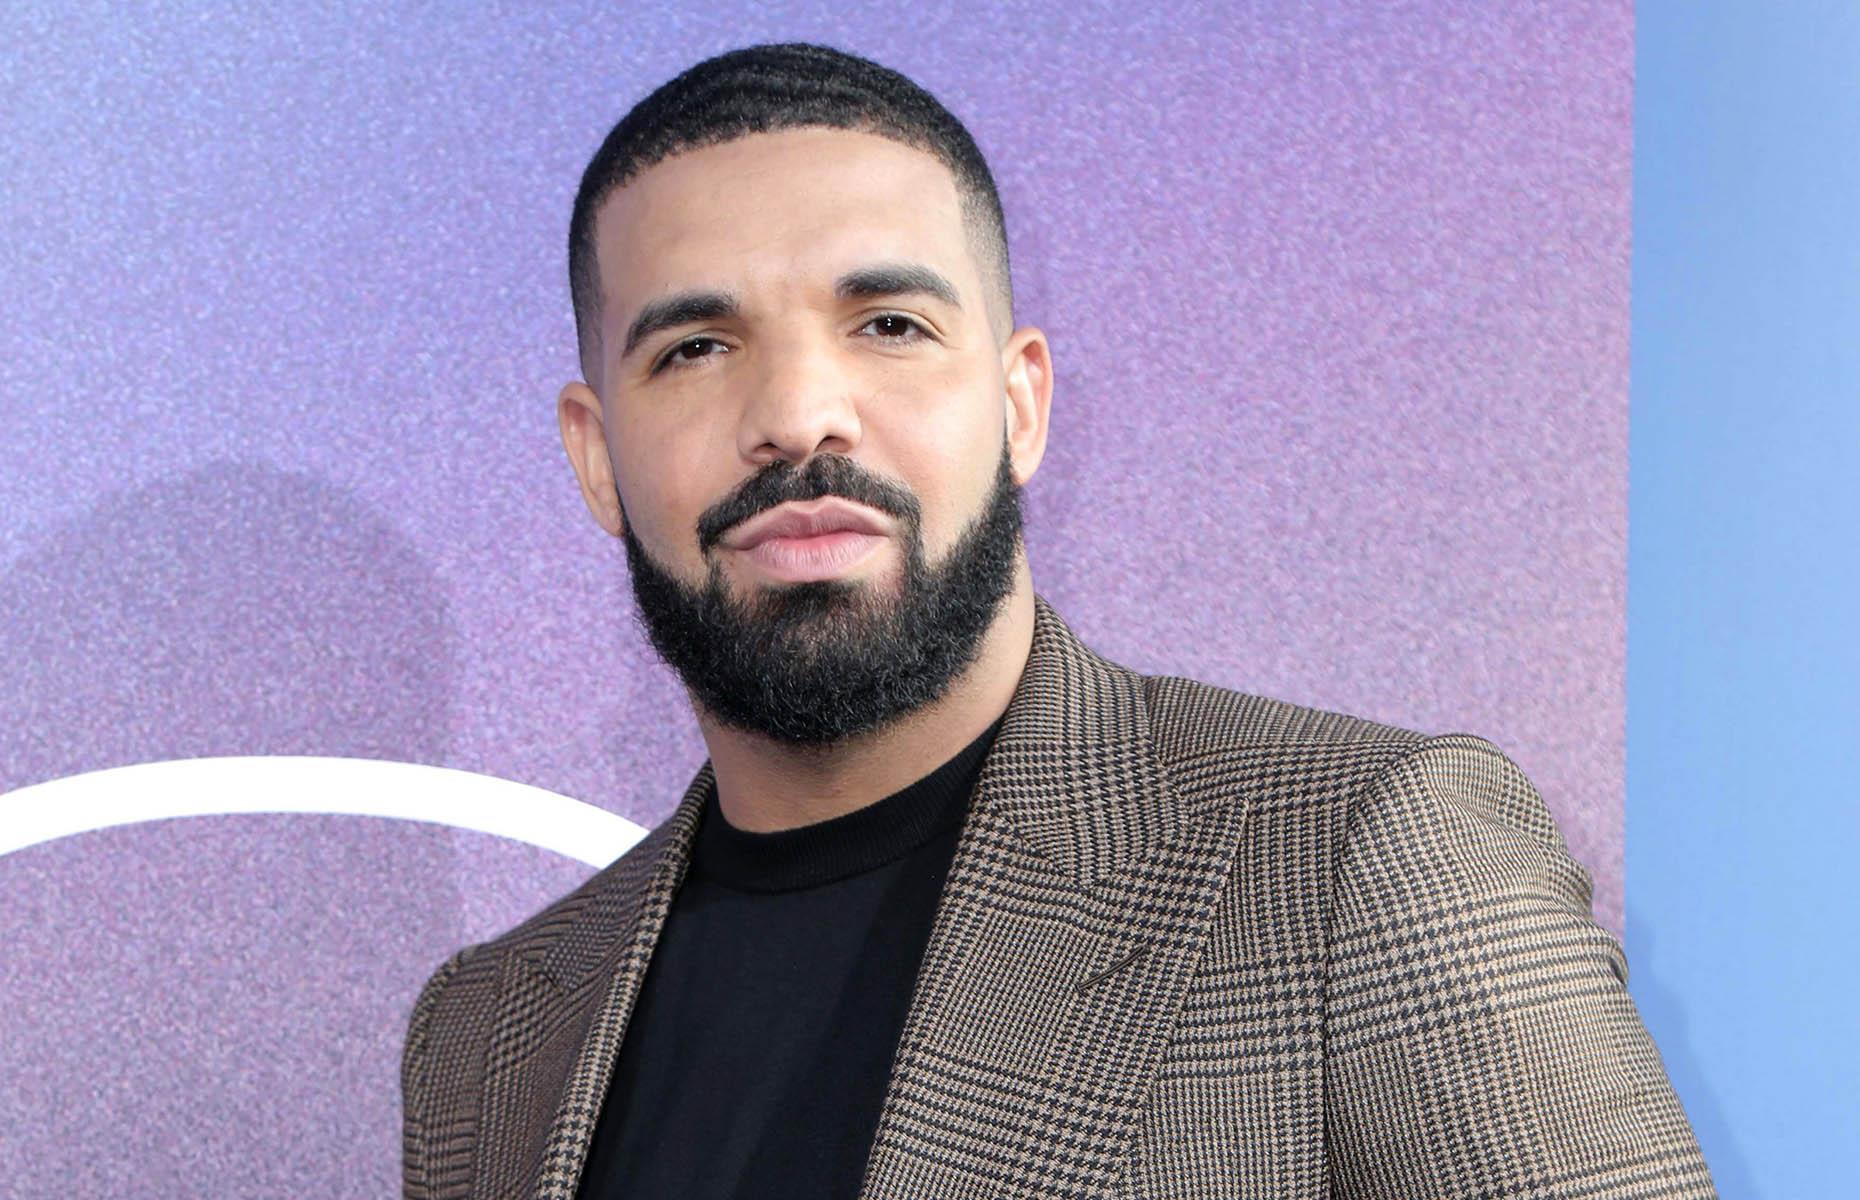 <p>It's long been suggested robots could replace a multitude of manual labor roles, but now AI is infringing upon more artistic professions, including singers.</p>  <p>A song called <em>Heart on My Sleeve,</em> which uses AI to mimic the voices of music stars Drake (pictured) and The Weeknd, recently went viral. Reports at the time suggested the track could be eligible for a Grammy award. However, this claim was later rubbished.</p>